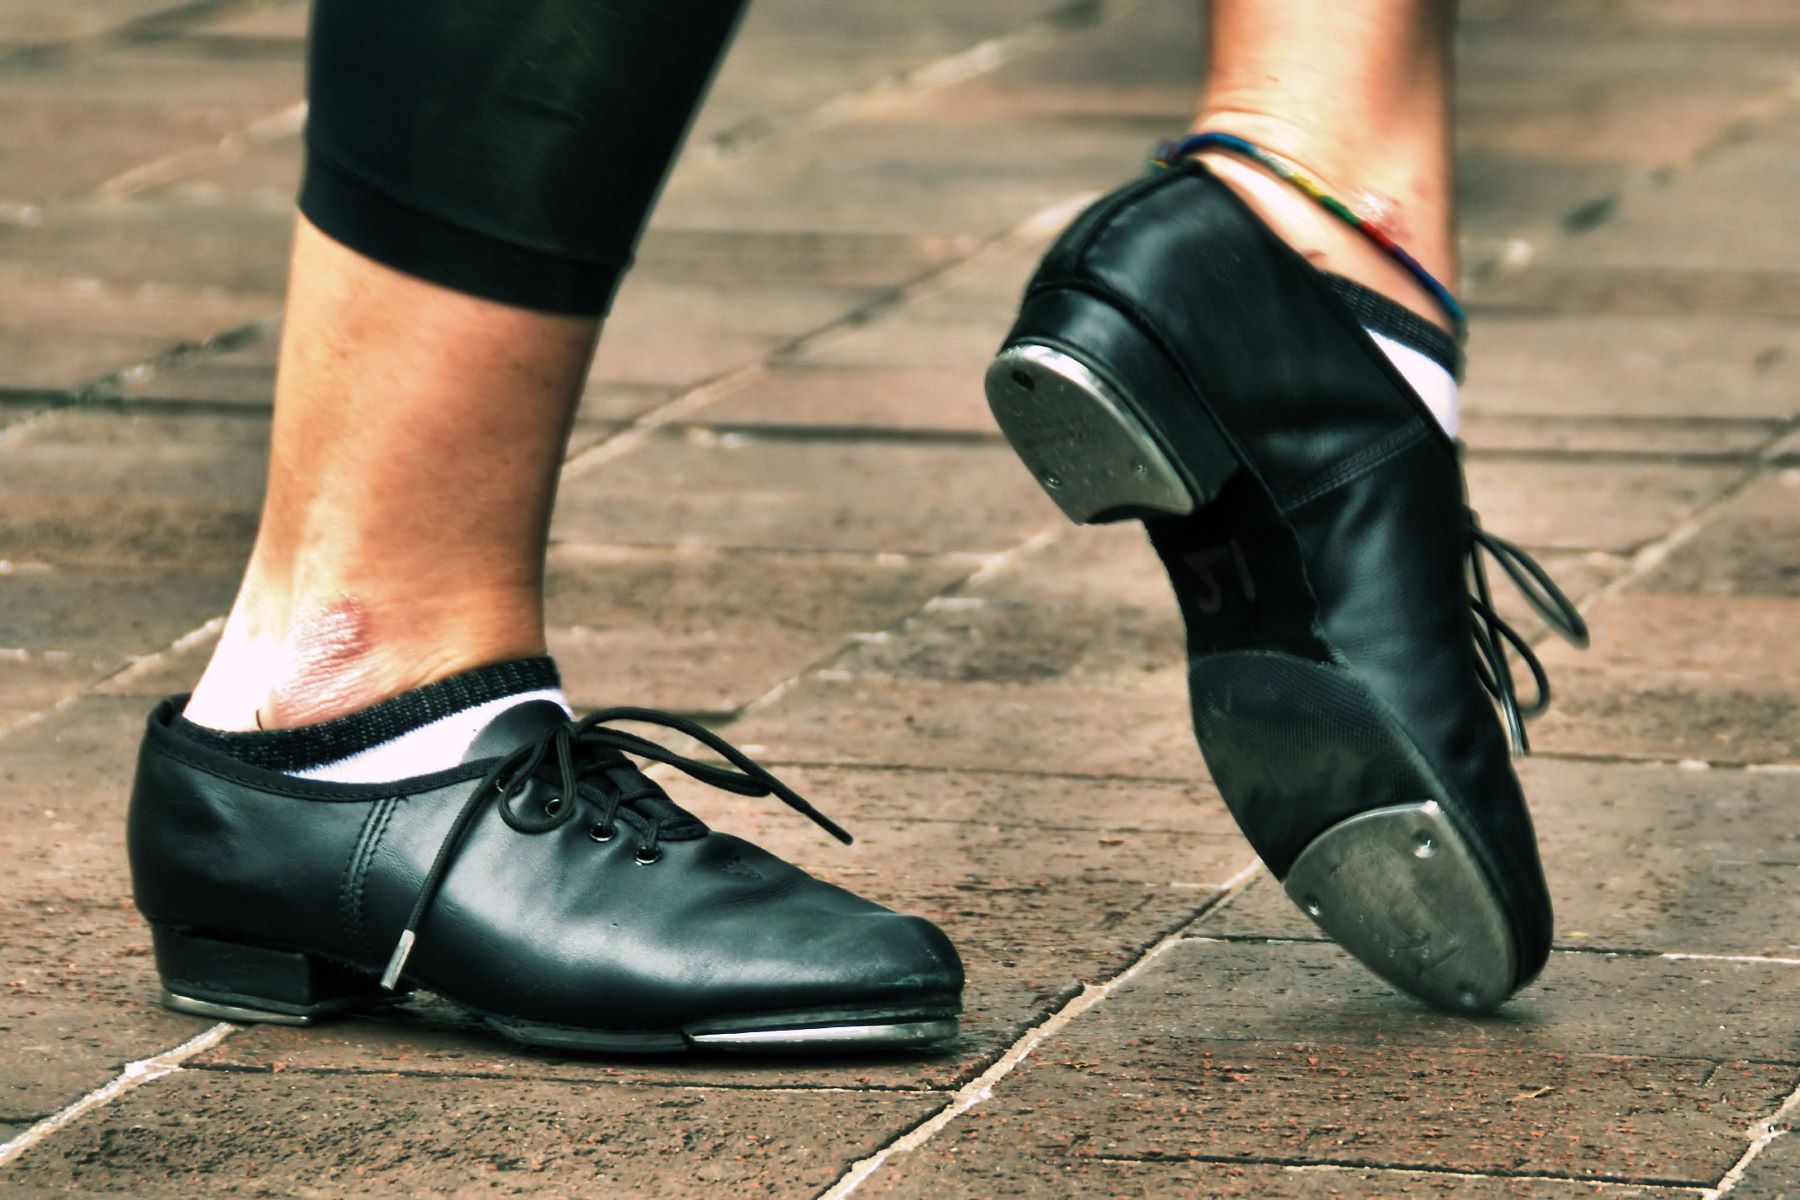 14-facts-about-national-tap-dance-day-may-25th